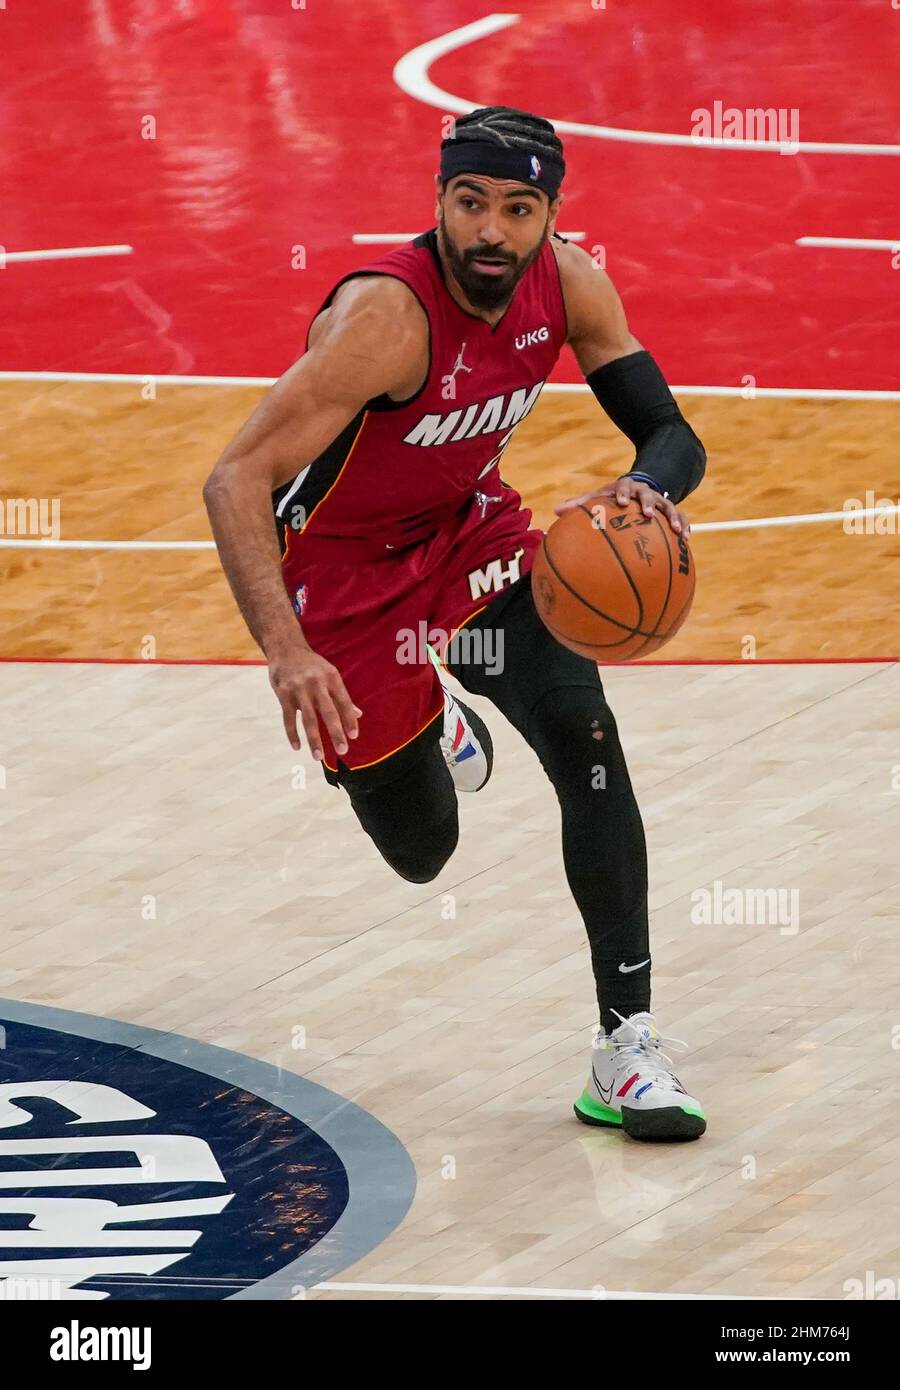 WASHINGTON, DC - FEBRUARY 07: Miami Heat guard Gabe Vincent (2) charges  into the attack during a NBA game between the Washington Wizards and the Miami  Heat, on February 07, 2022, at